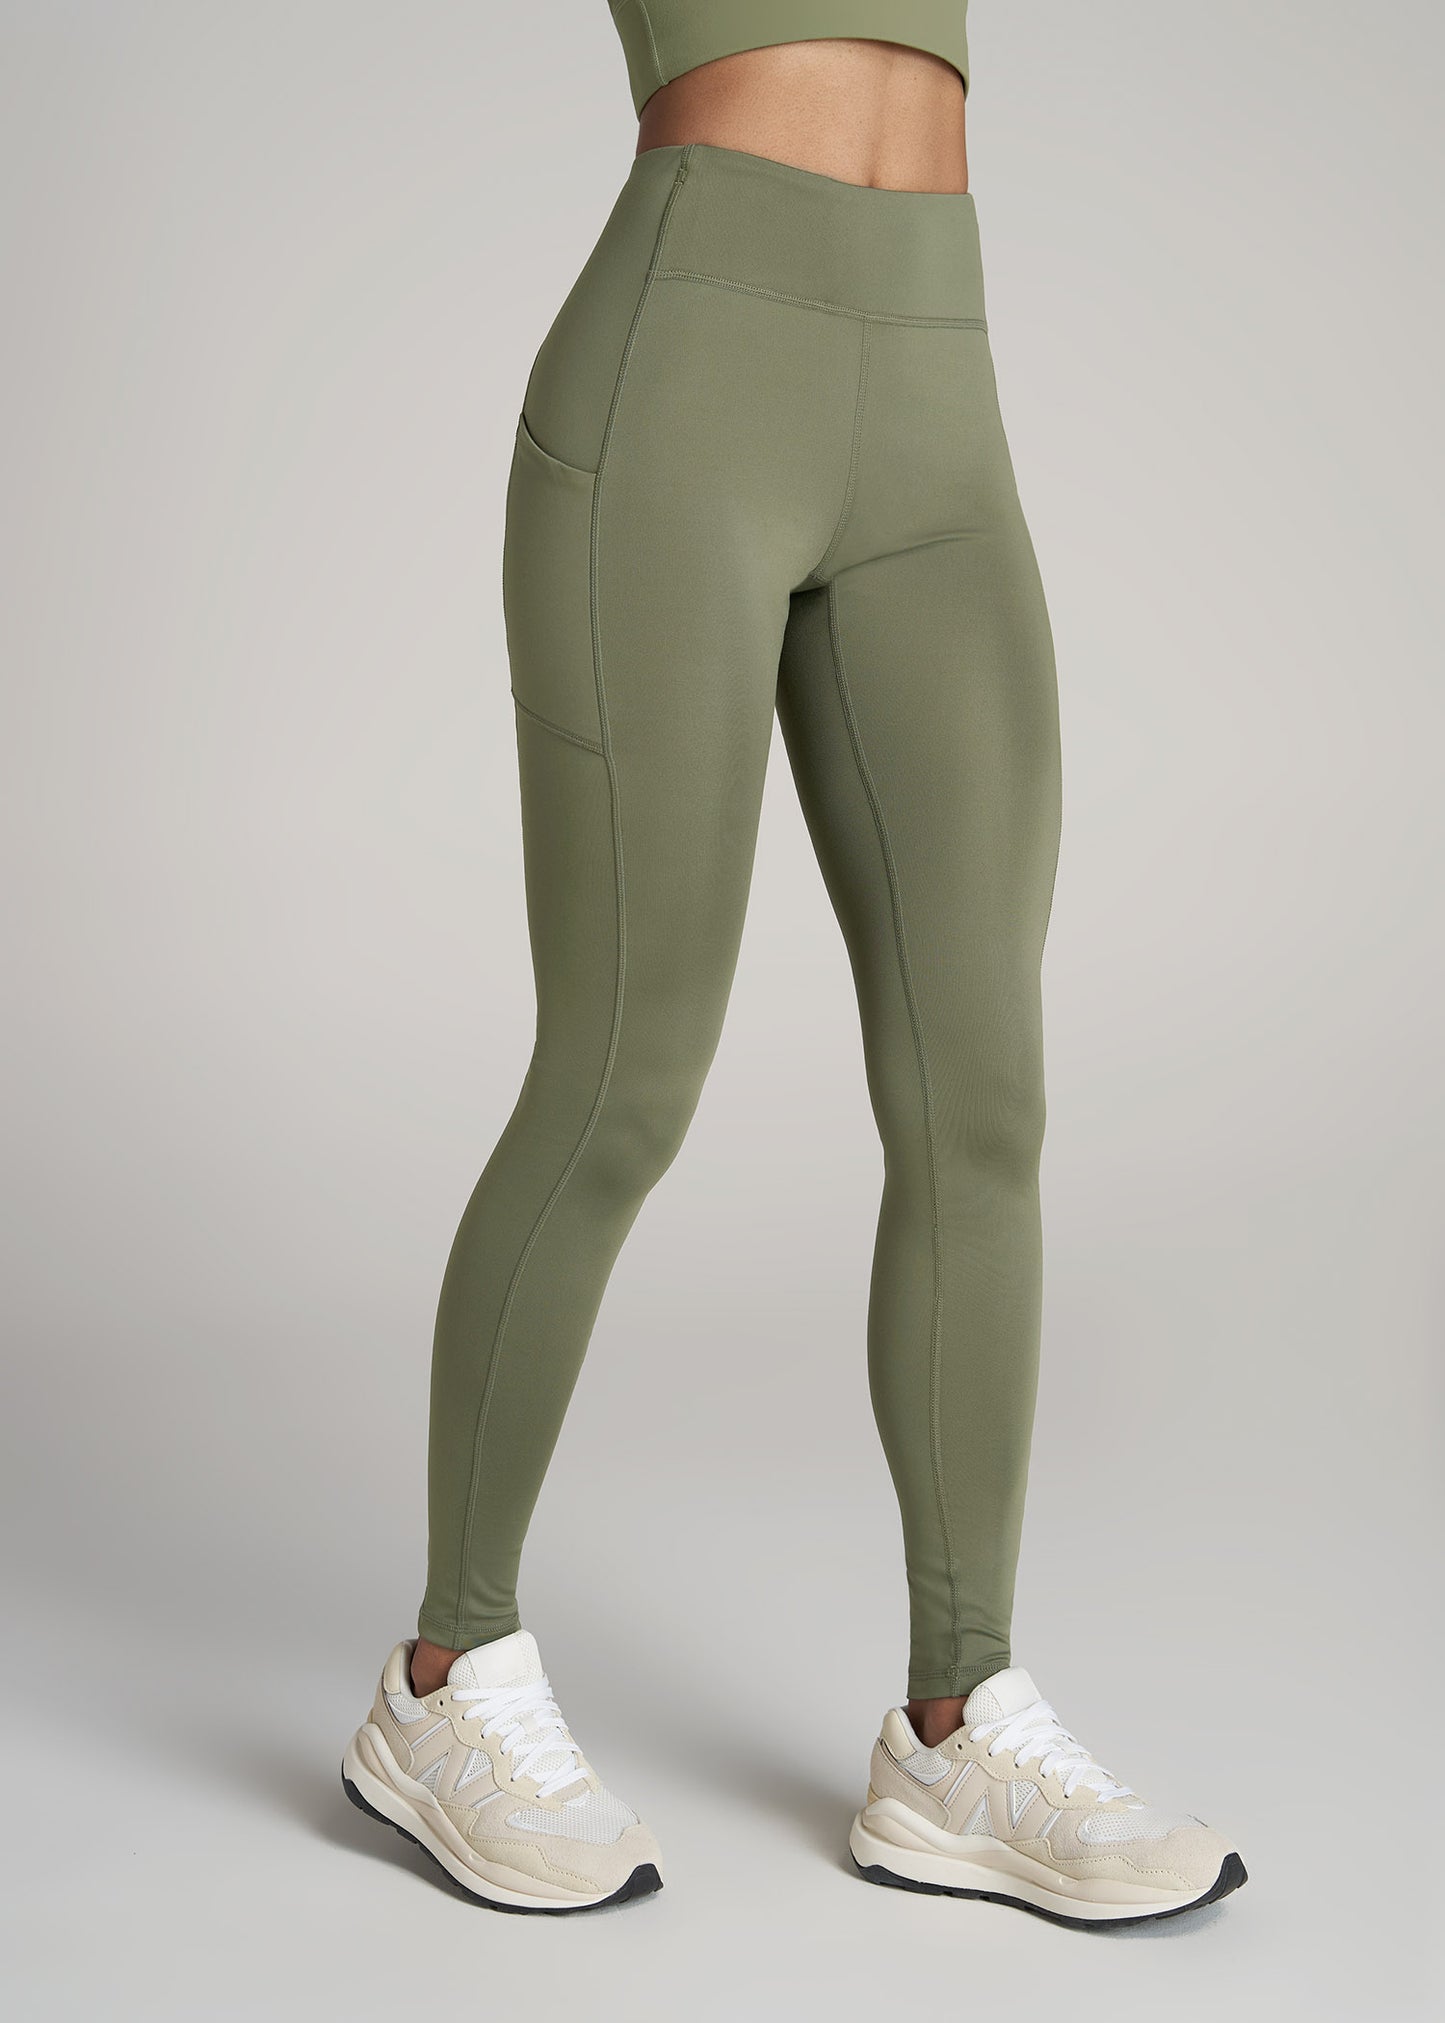    American-Tall-Women-Performance-Leggings-With-Pocket-Olive-side